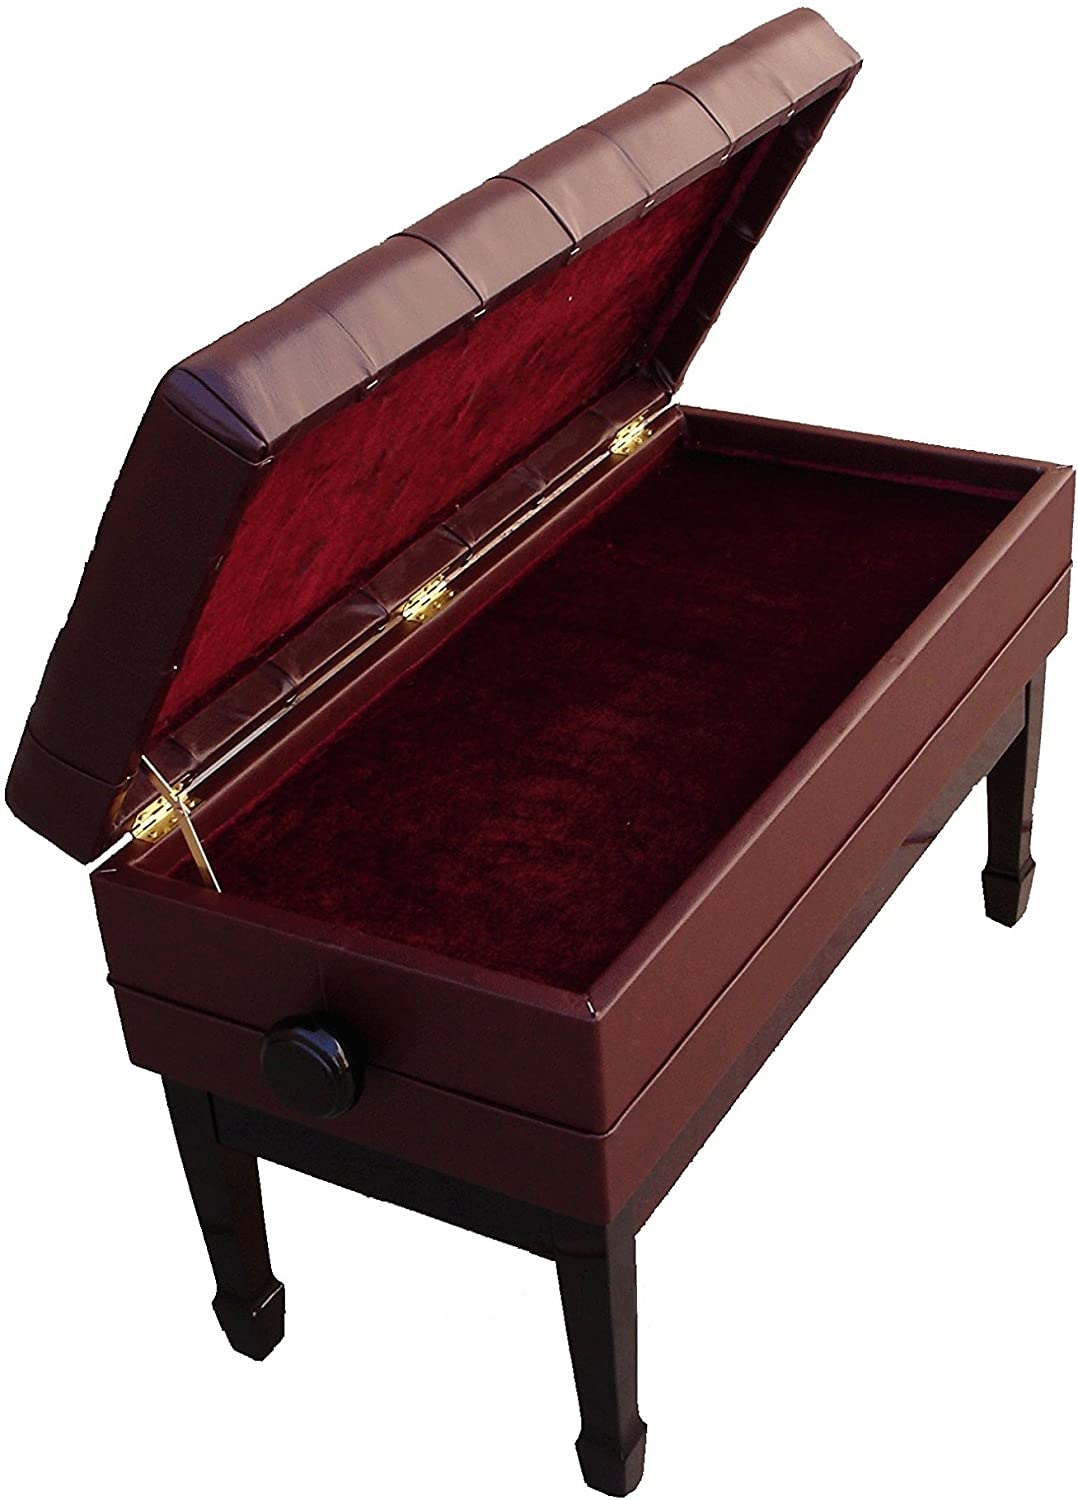 E-105 Artist Adjustable Duet Bench in Mahogany Leather - Storage Compartment